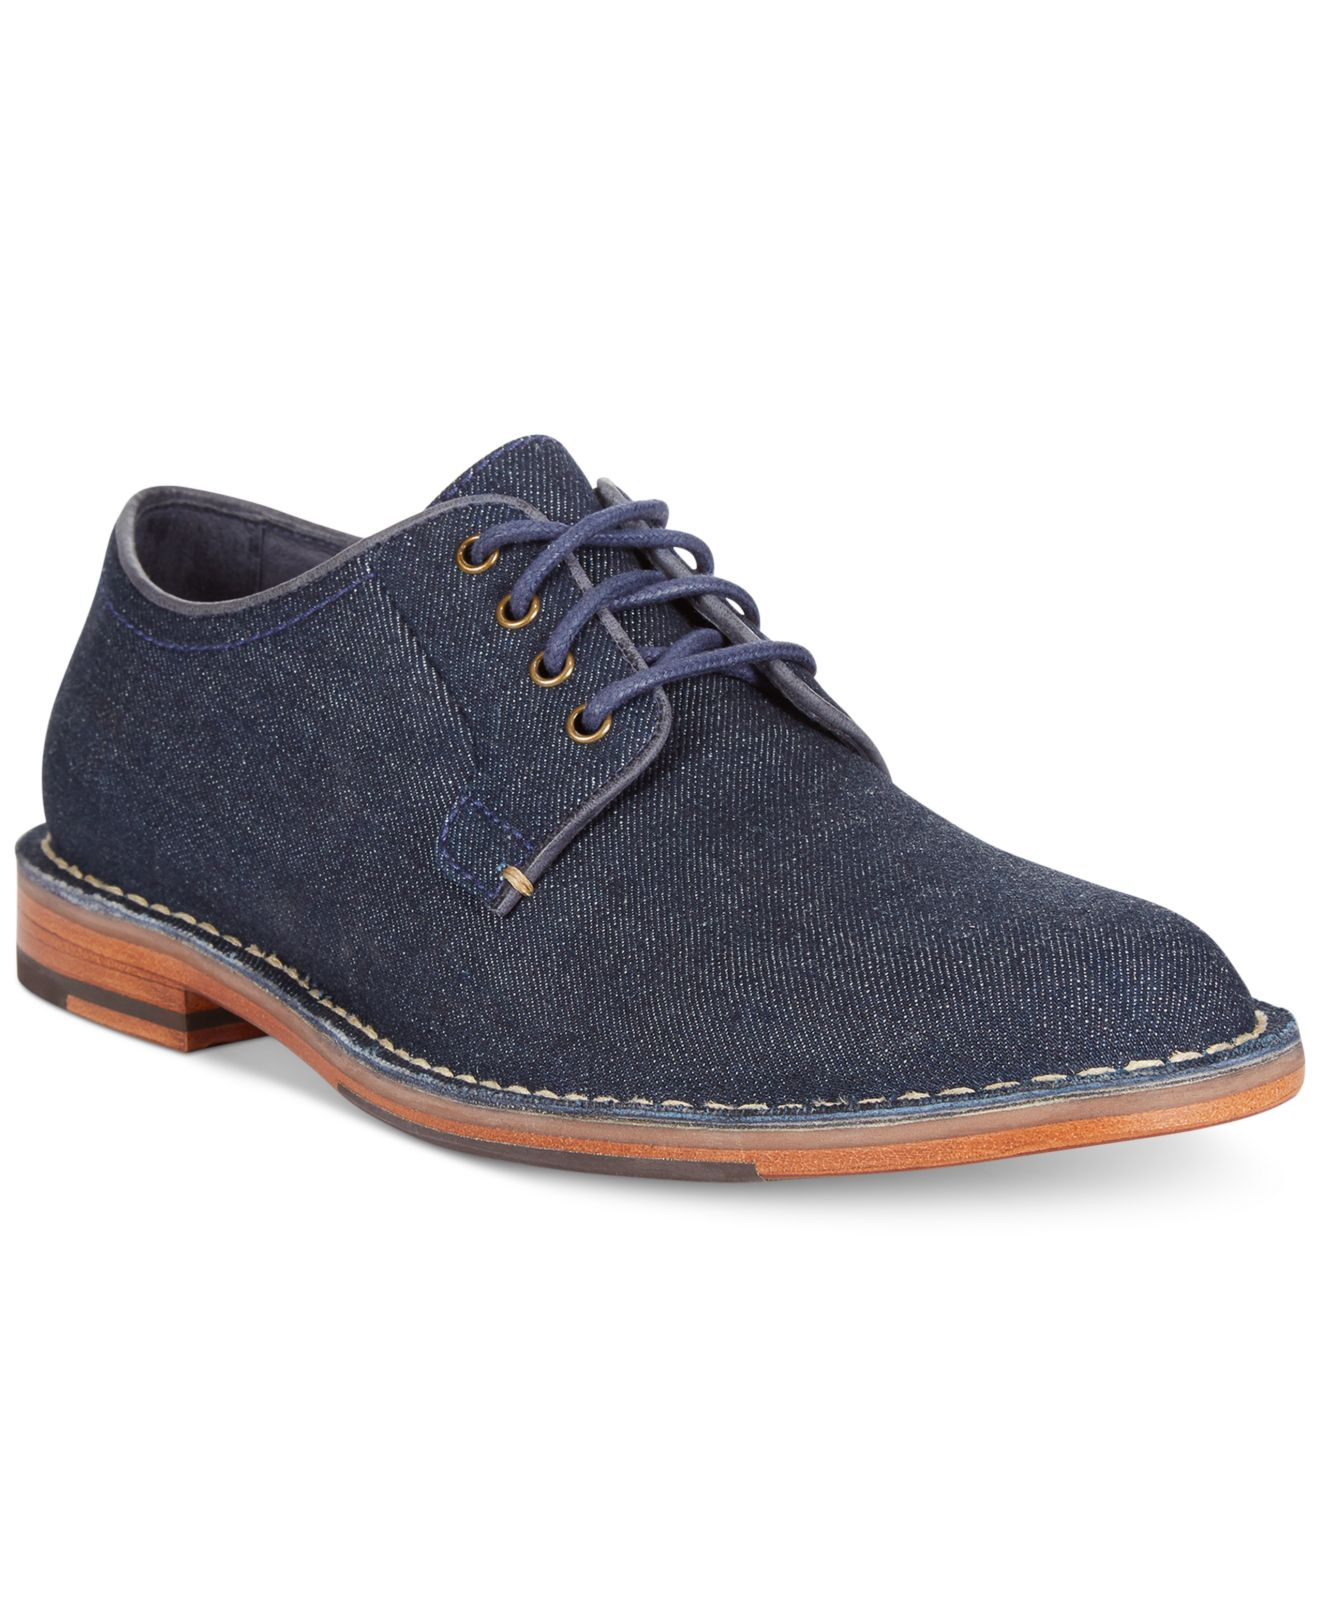 Lyst - Cole Haan Grover Oxfords in Blue for Men